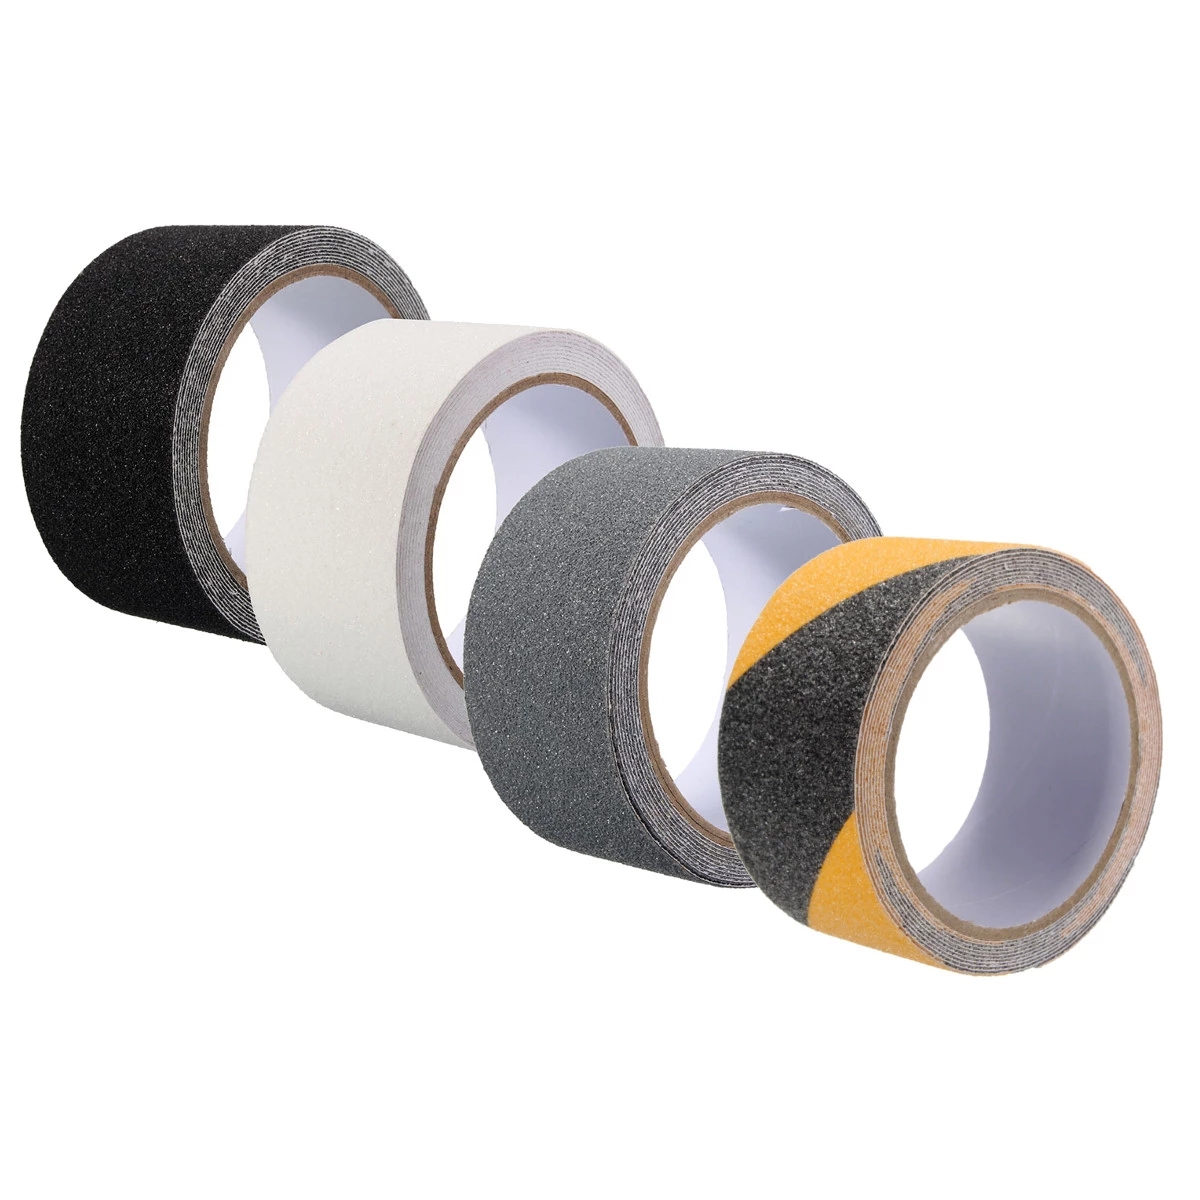 Non-Slip-Safety-Grip-Tape-Anti-Slip-Indoor-Outdoor-Stickers-Strong-Adhesive-Safety-Traction-Tape-Sta-1751585-8